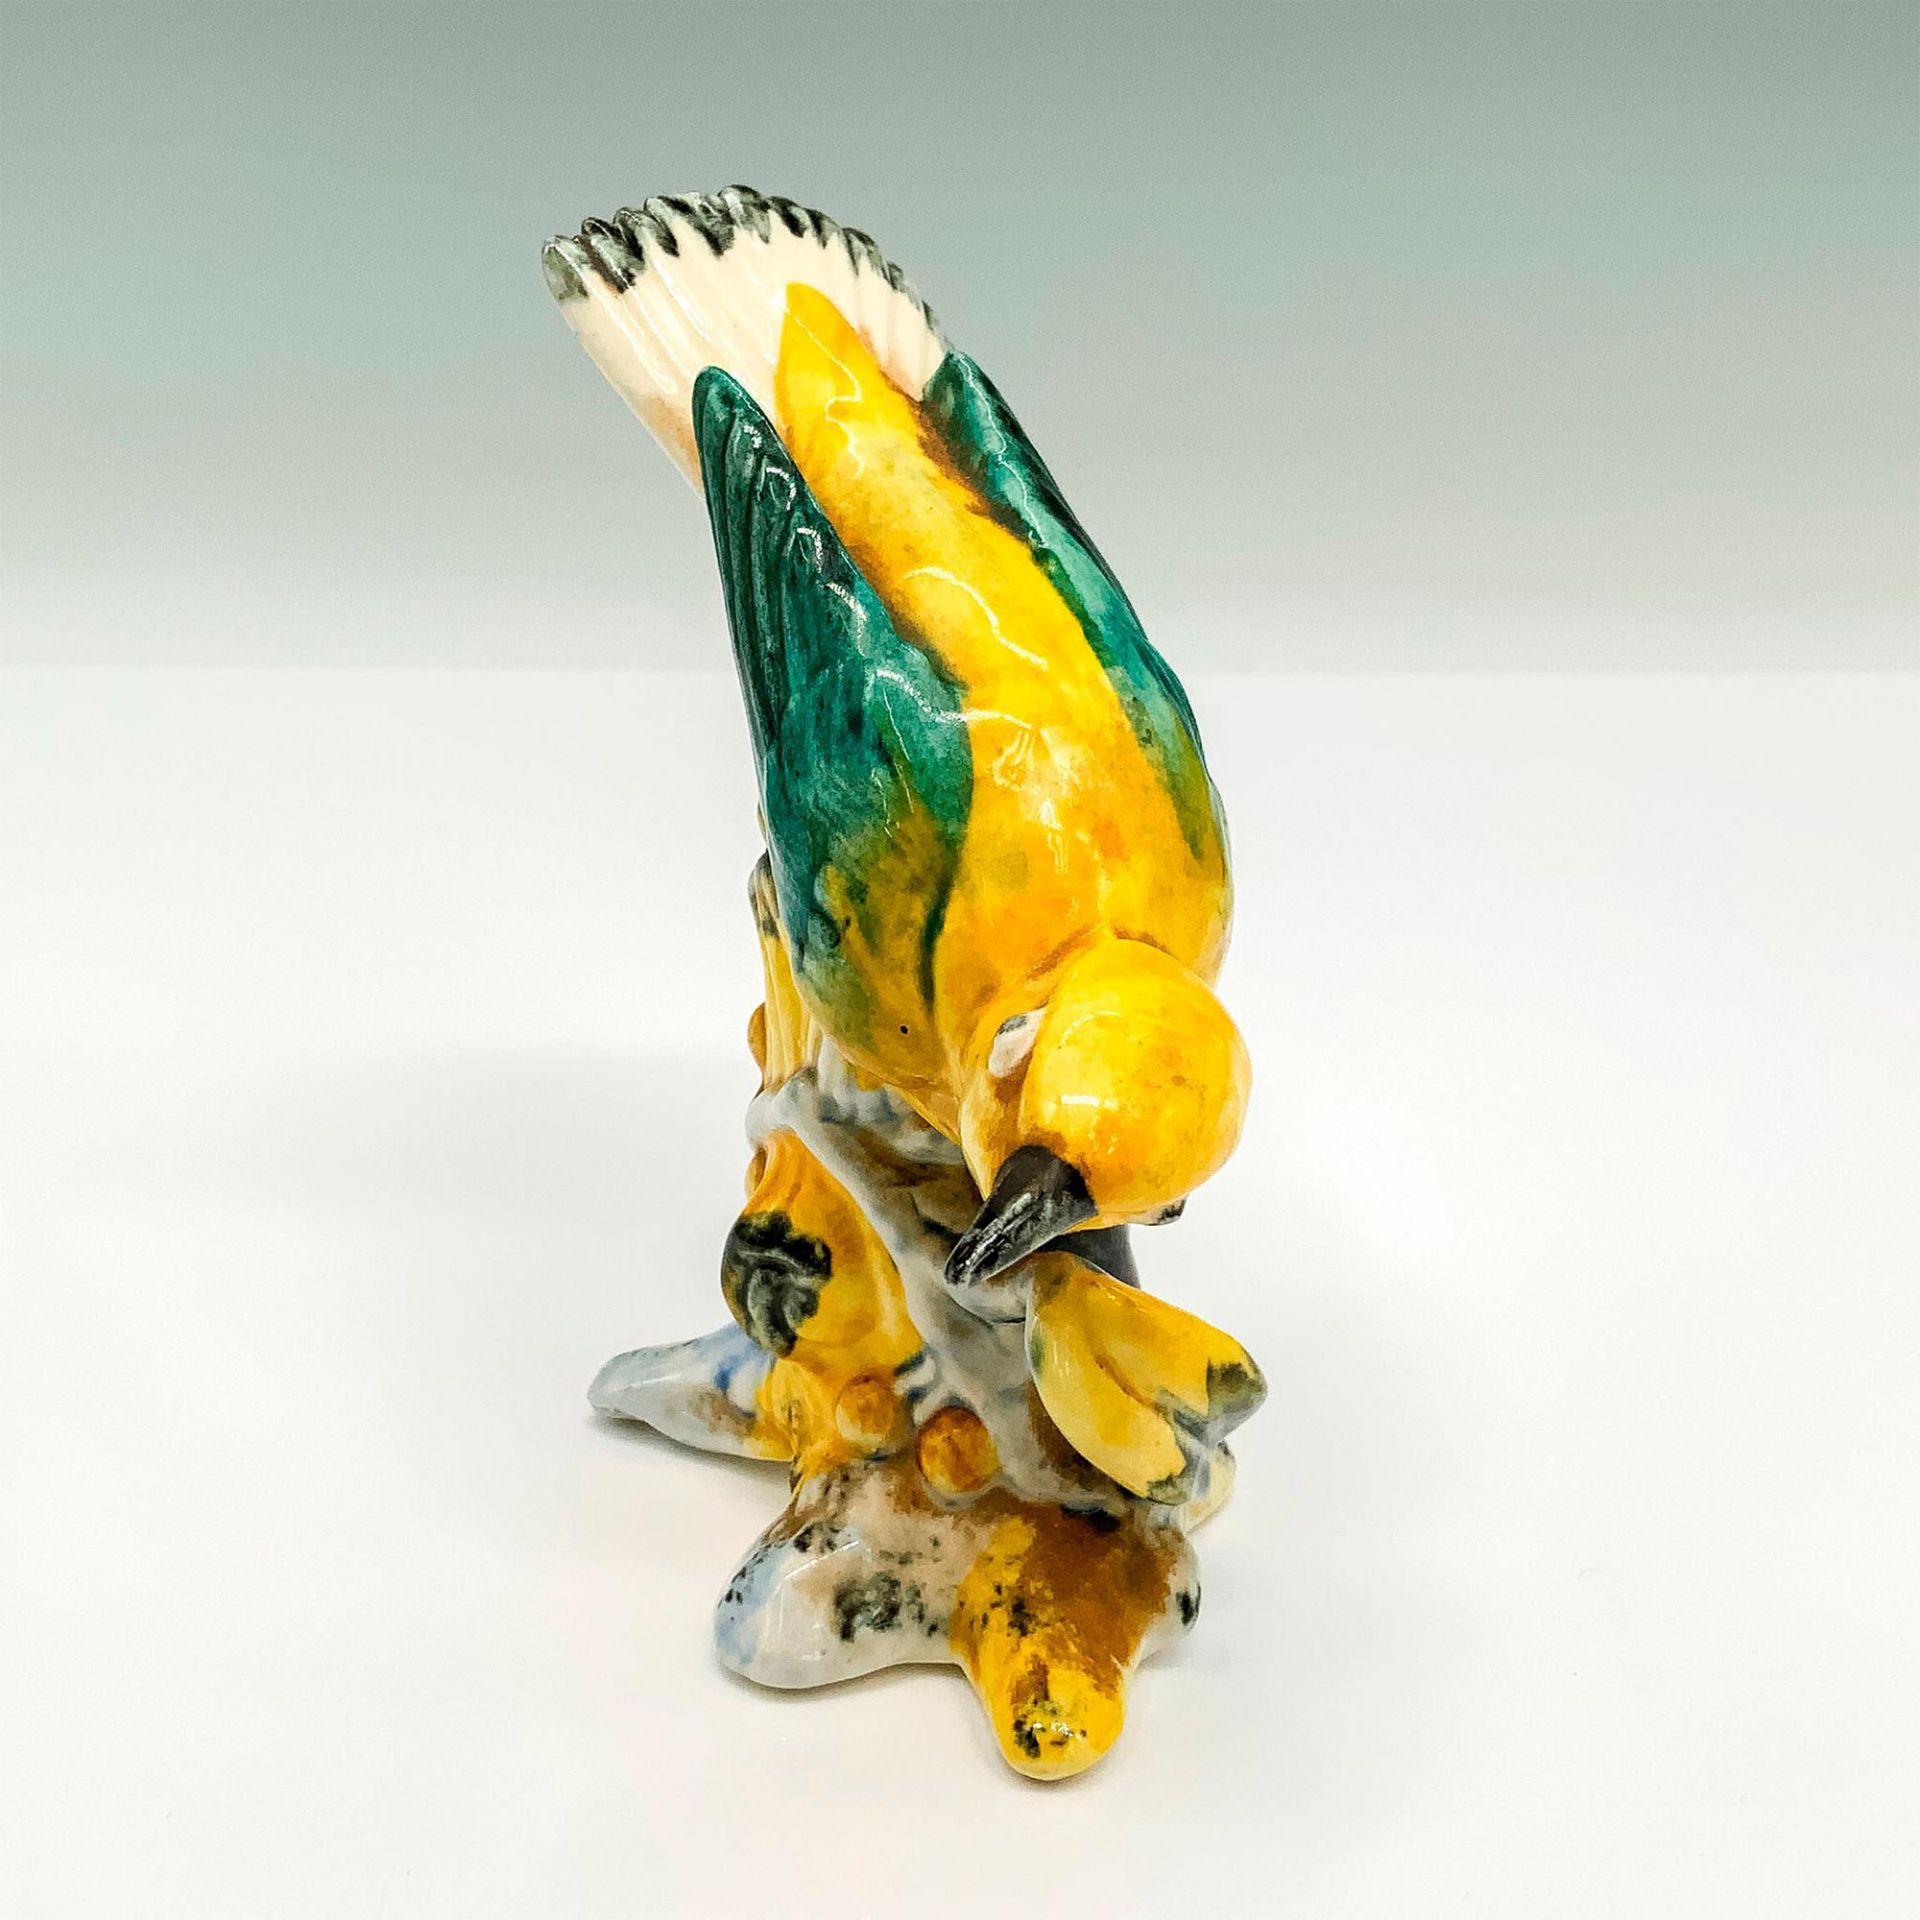 Stangl Pottery Bird Figurine, Yellow Warbler 3447 - Image 4 of 5